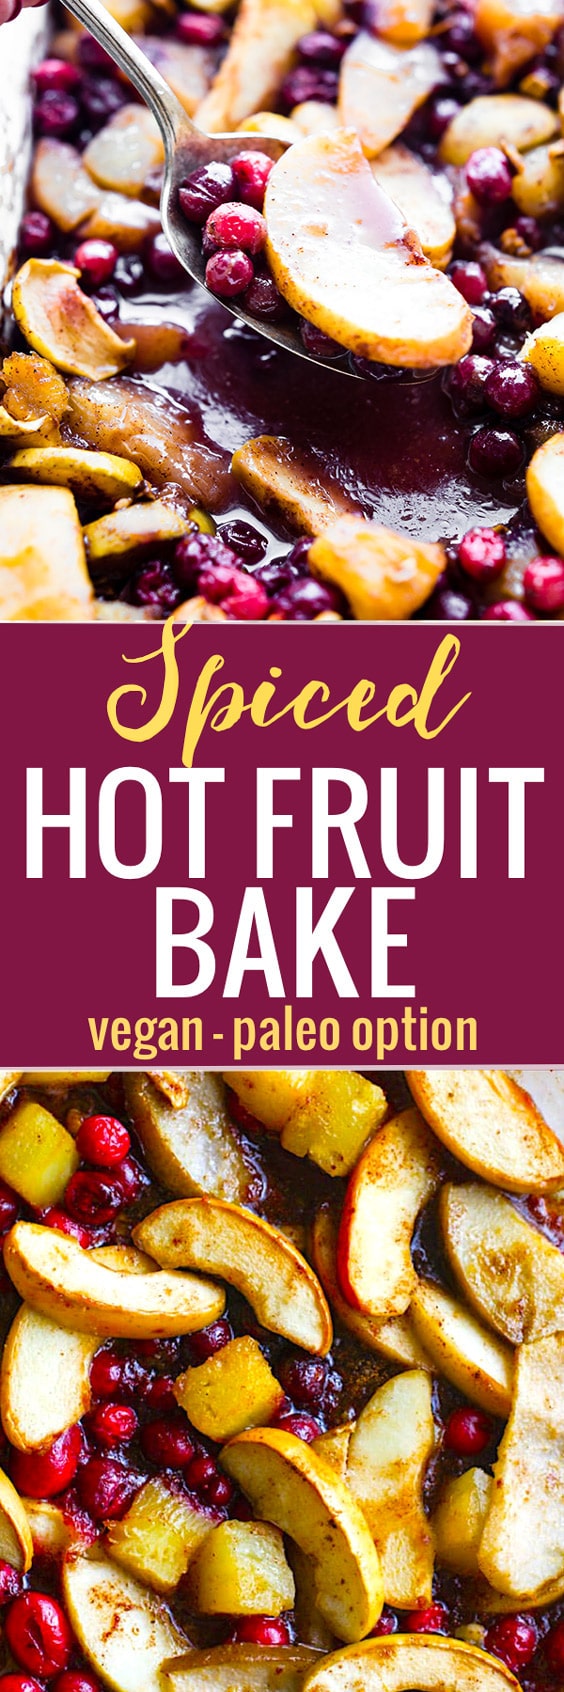 Easy Spiced Hot Fruit Bake! A delicious and healthy holiday breakfast bake! This gluten free spiced hot fruit bake also makes for a great topping for waffles, pancakes, oatmeal, or by simply by itself! A nutritious dish to add to your Christmas or New Year's Brunch! Vegan friendly